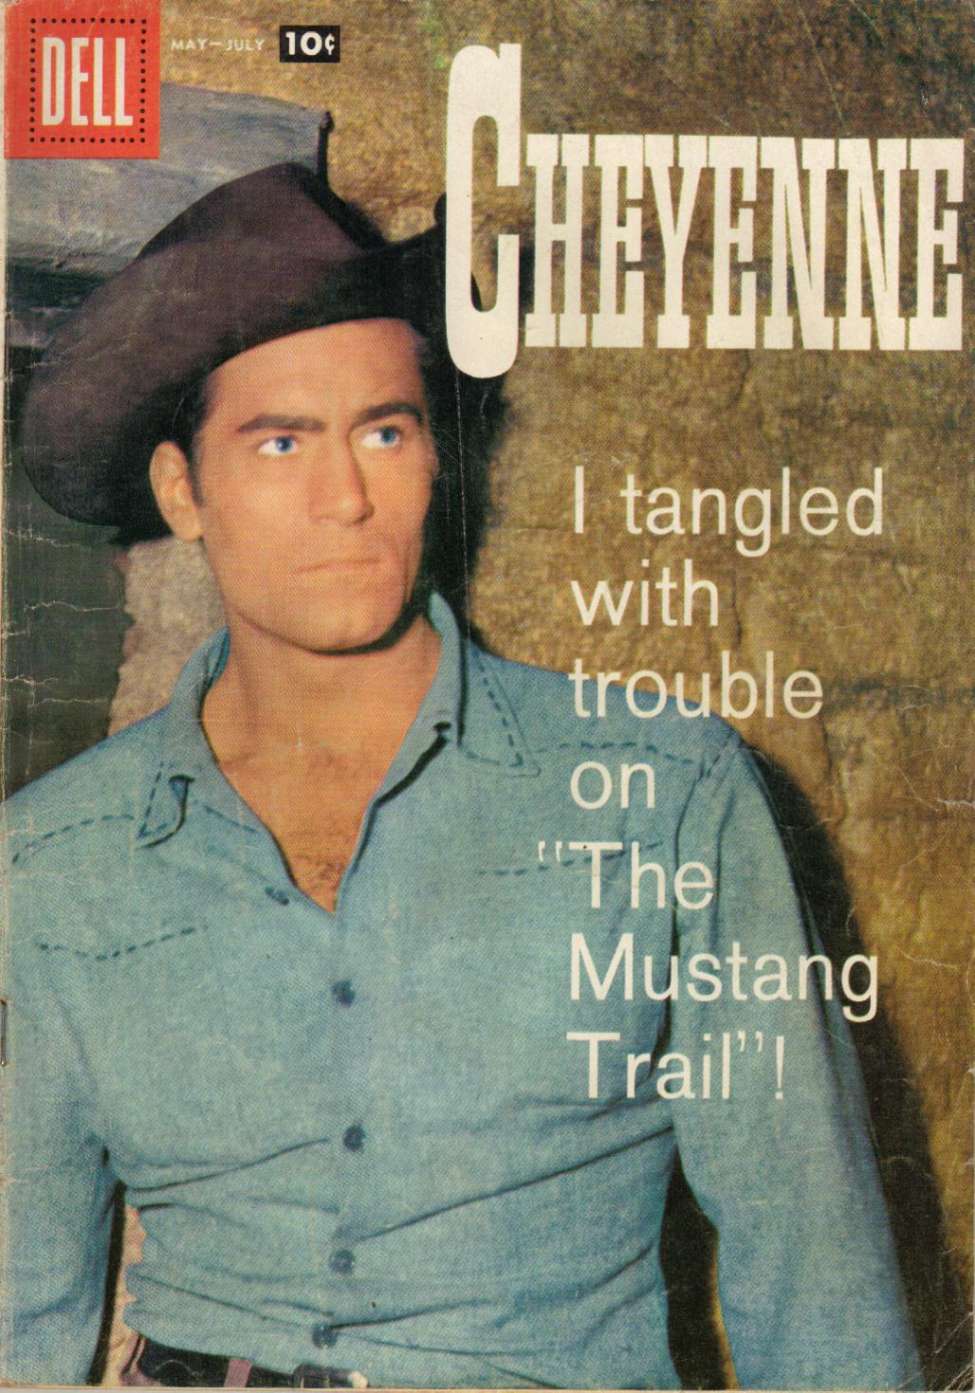 Book Cover For Cheyenne 7